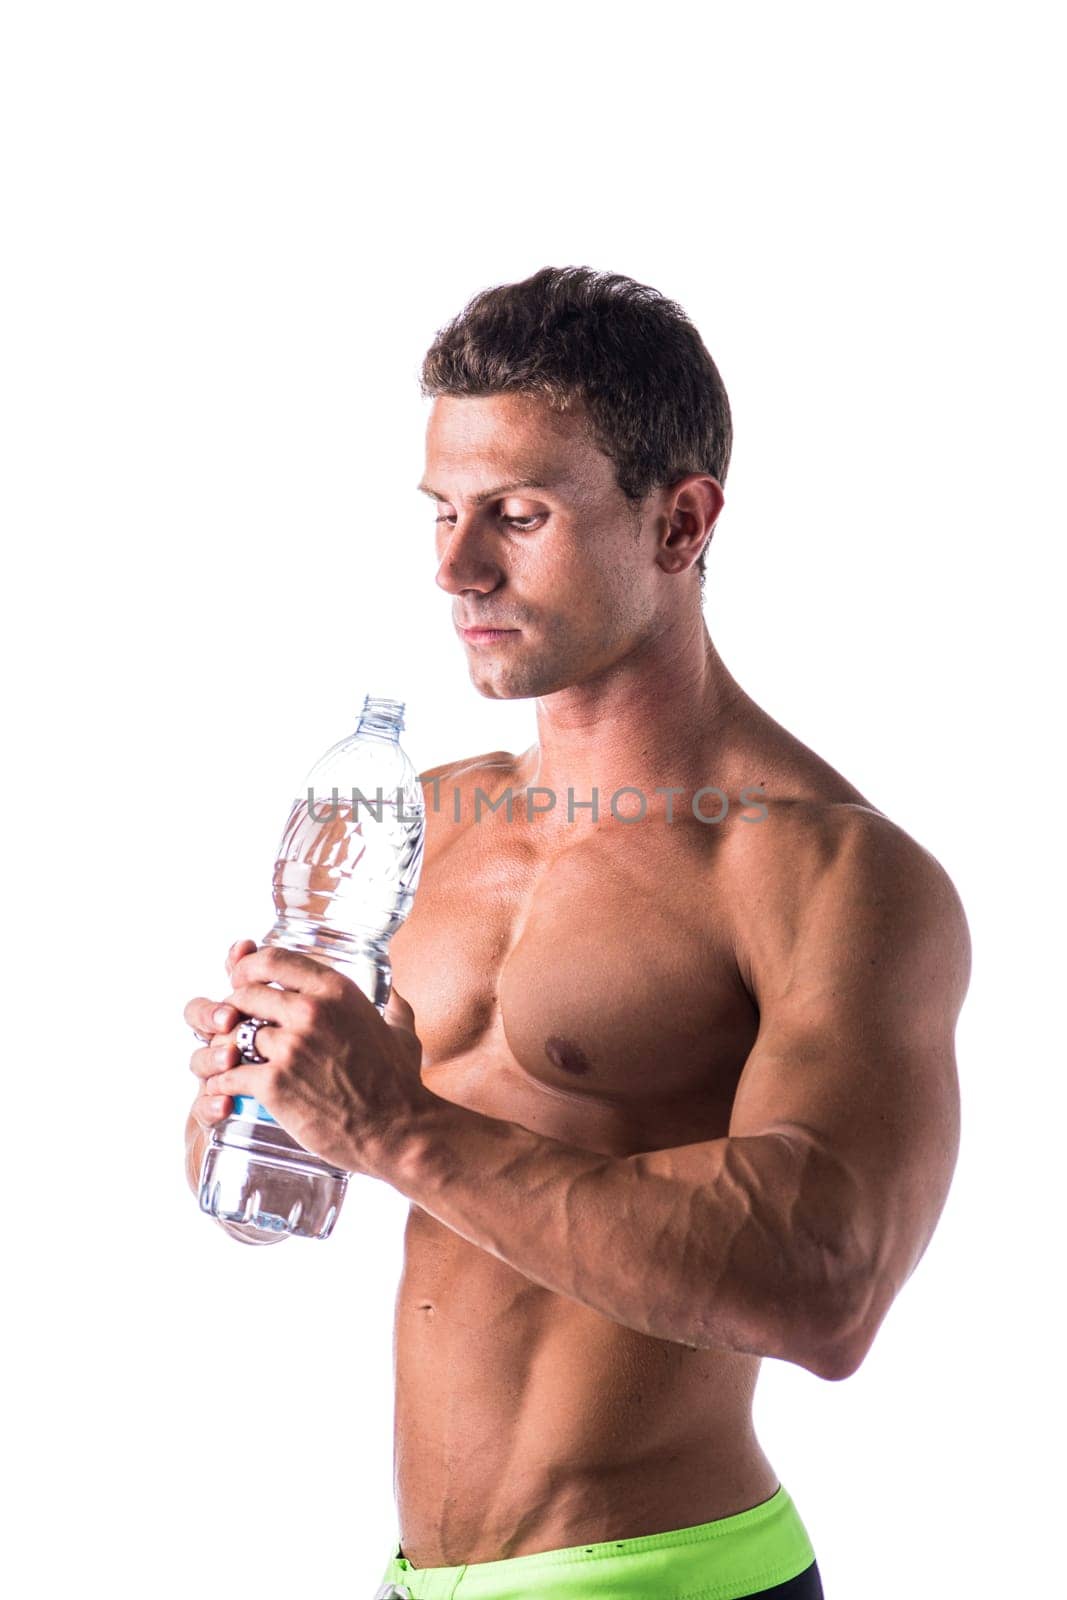 Muscular young man shirtless, drinking water from bottle by artofphoto